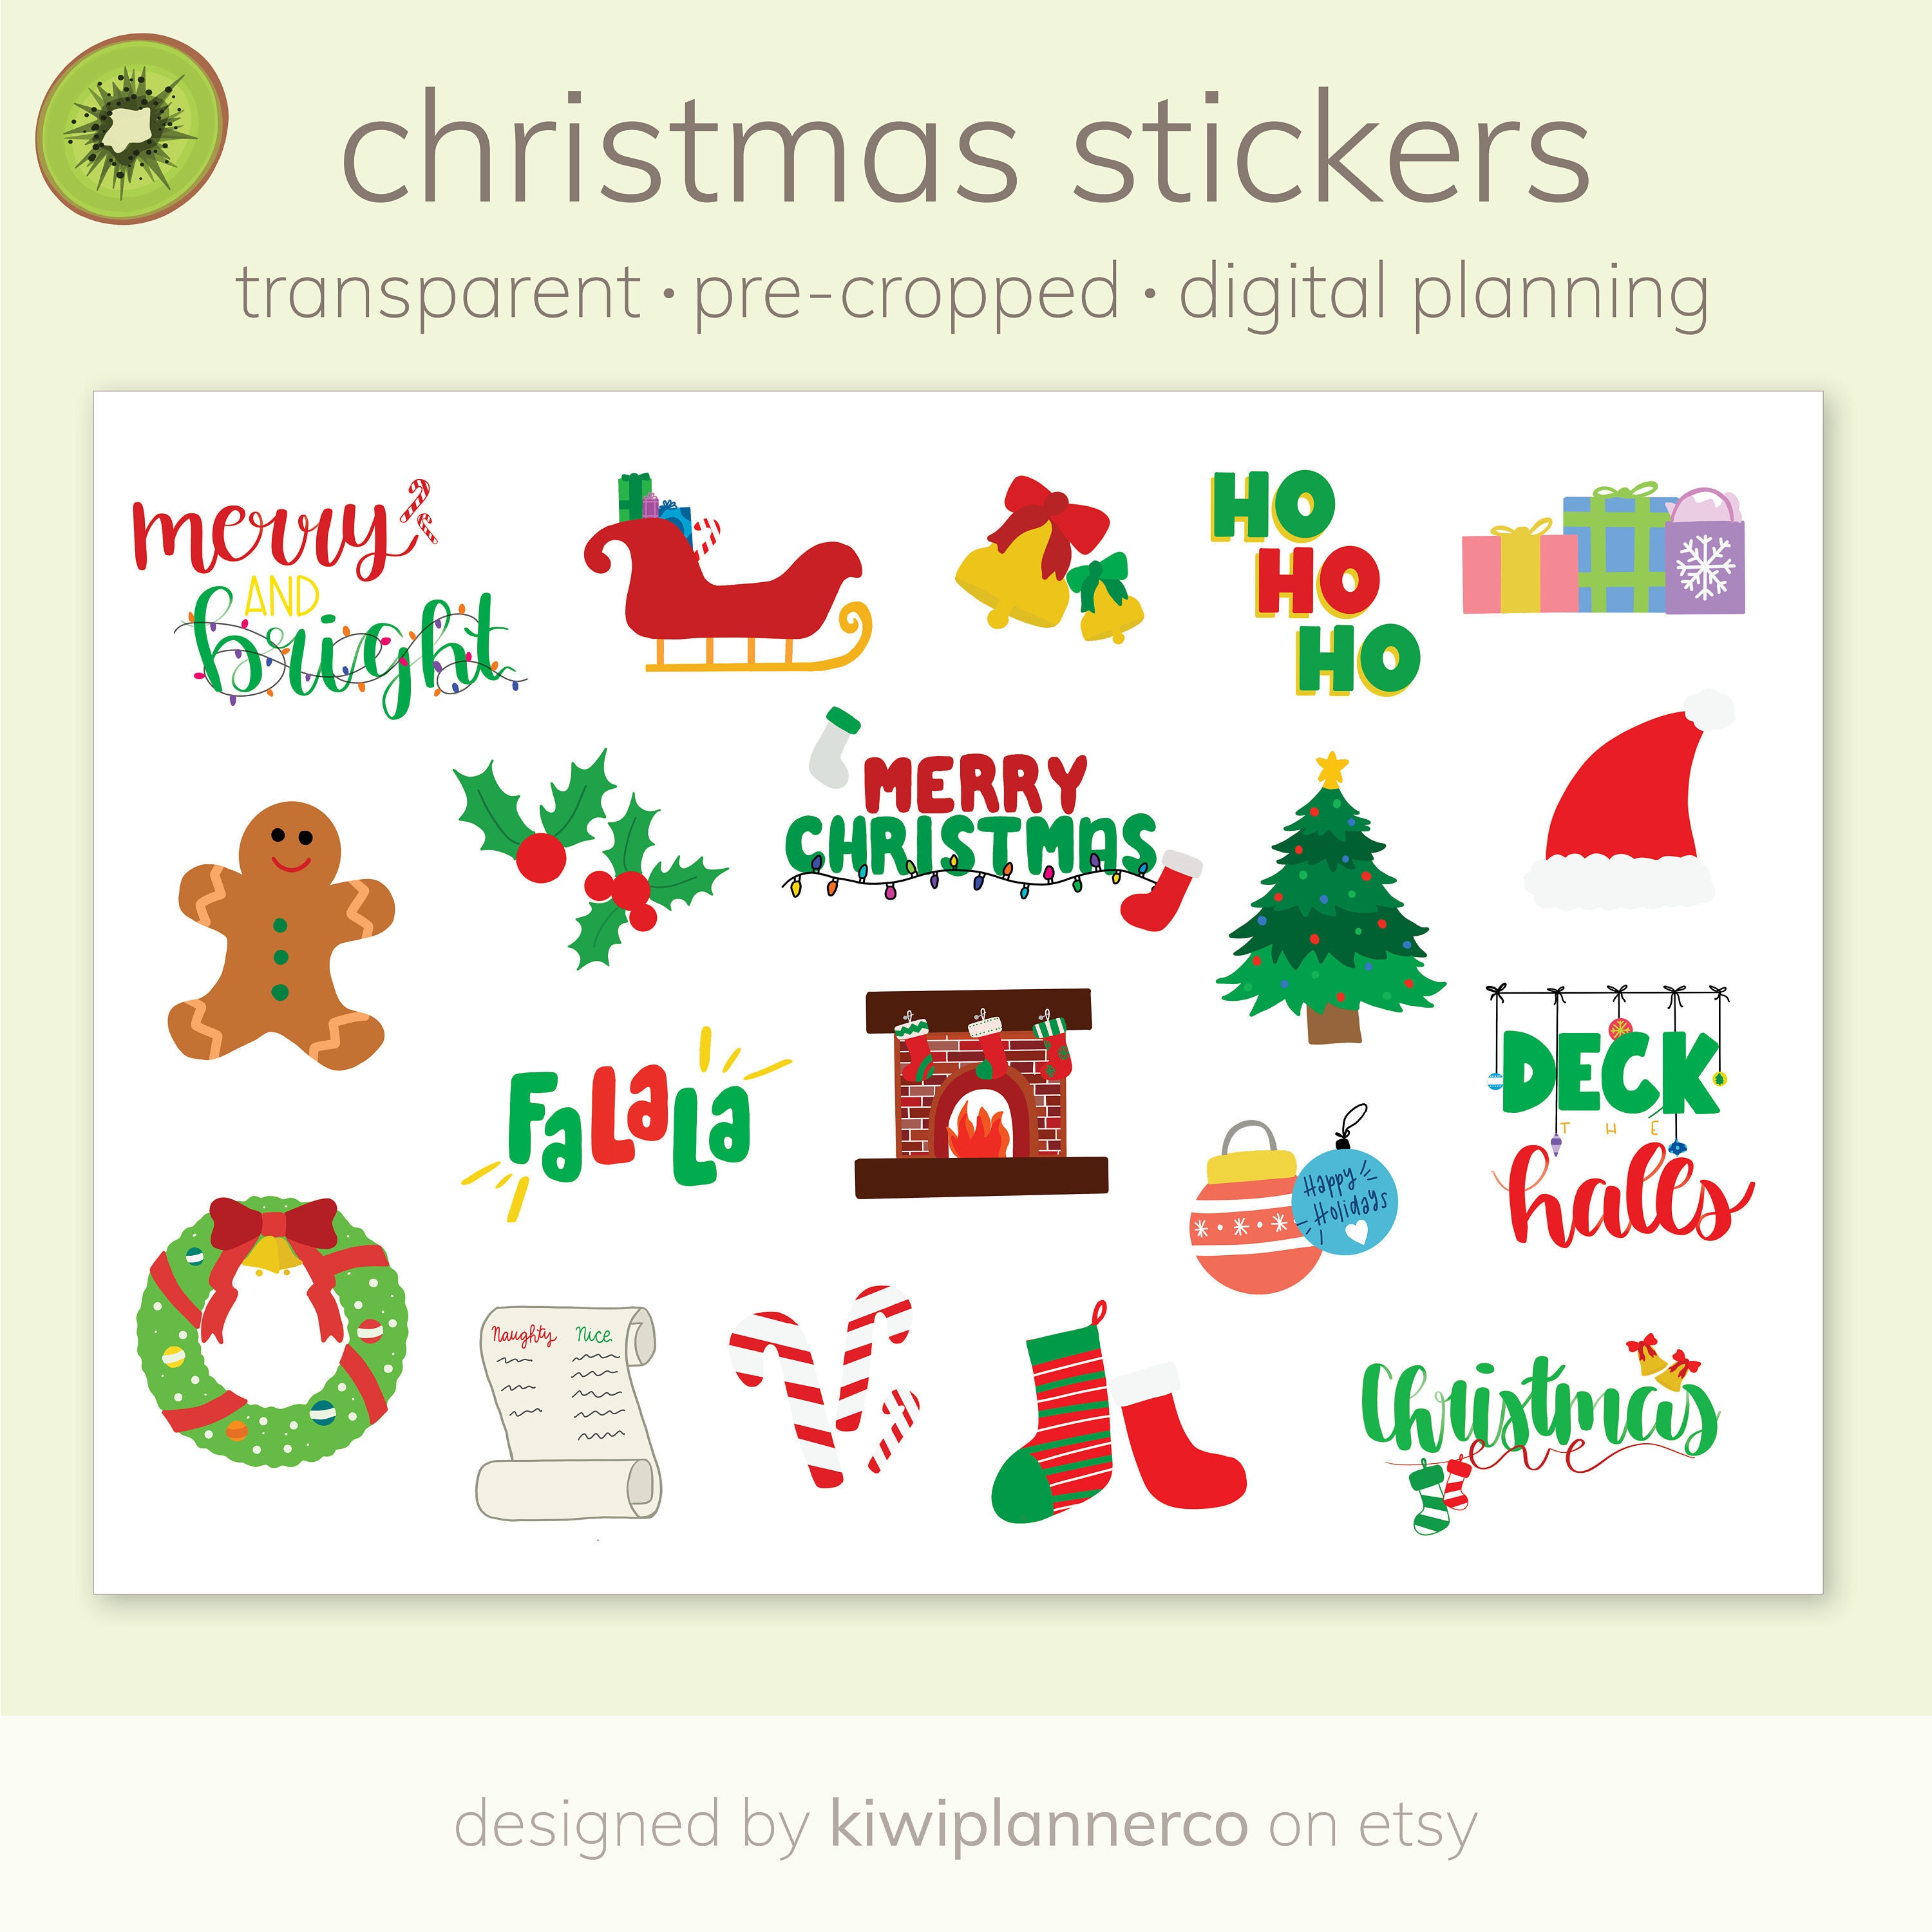 Digital Stickers CHRISTMAS EDITION Transparent, Pre-cropped Goodnotes,  Notability, Ipad/tablet Christmas Holiday Stickers 